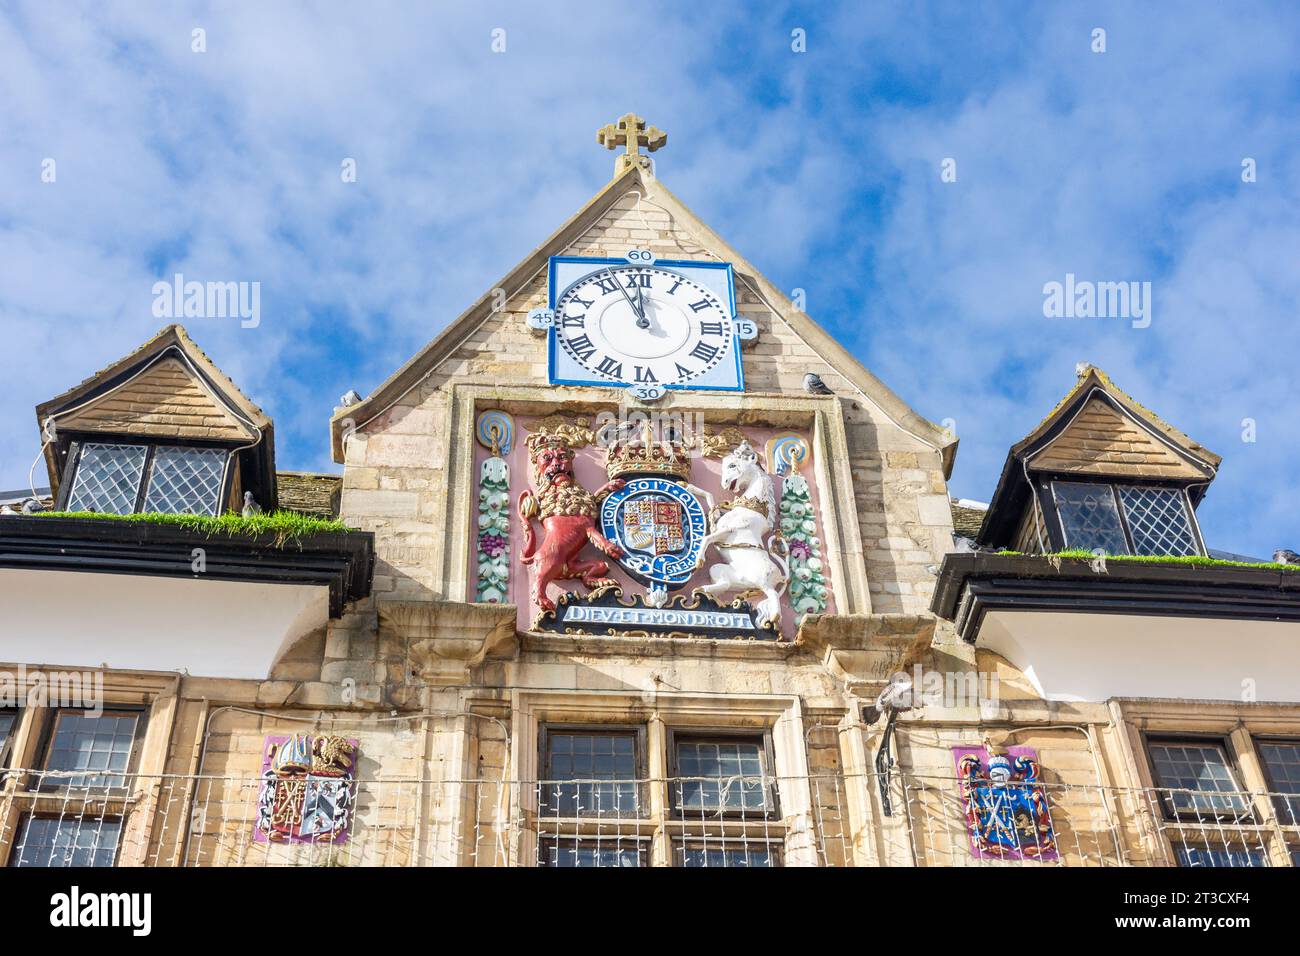 Royal Coat of Arms on facade of 17th century The Guildhall (Butter Cross), Cathedral Square, Peterborough, Cambridgeshire, England, United Kingdom Stock Photo